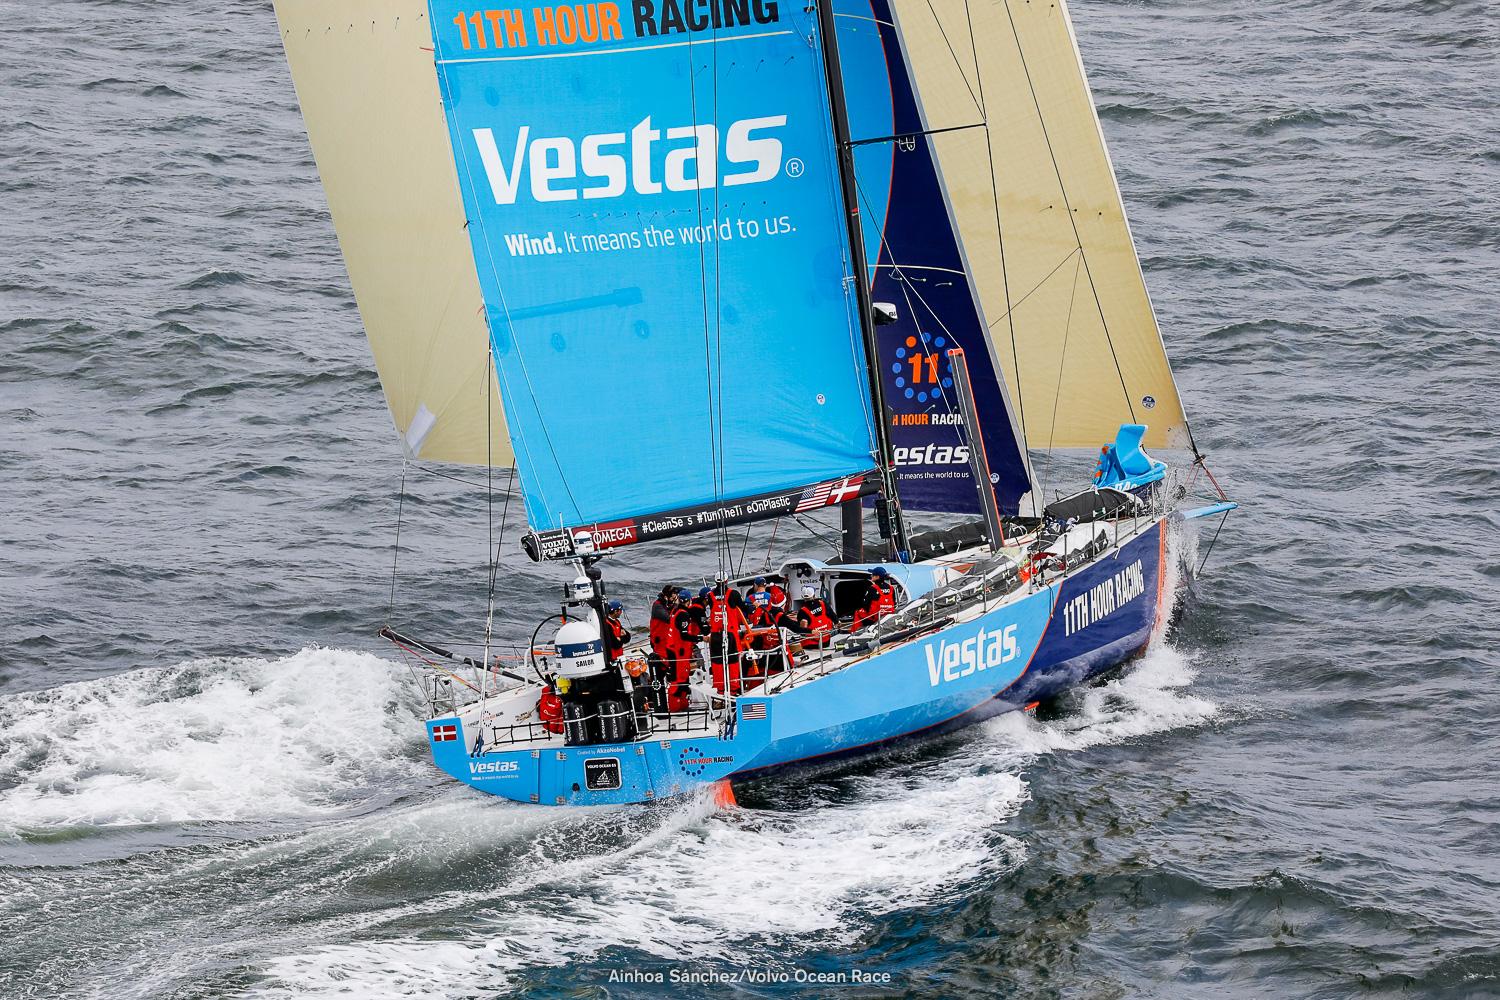 Vestas 11th Hour Racing beat Team Brunel to grab the final podium position on Leg 3 of the Volvo Ocean Race